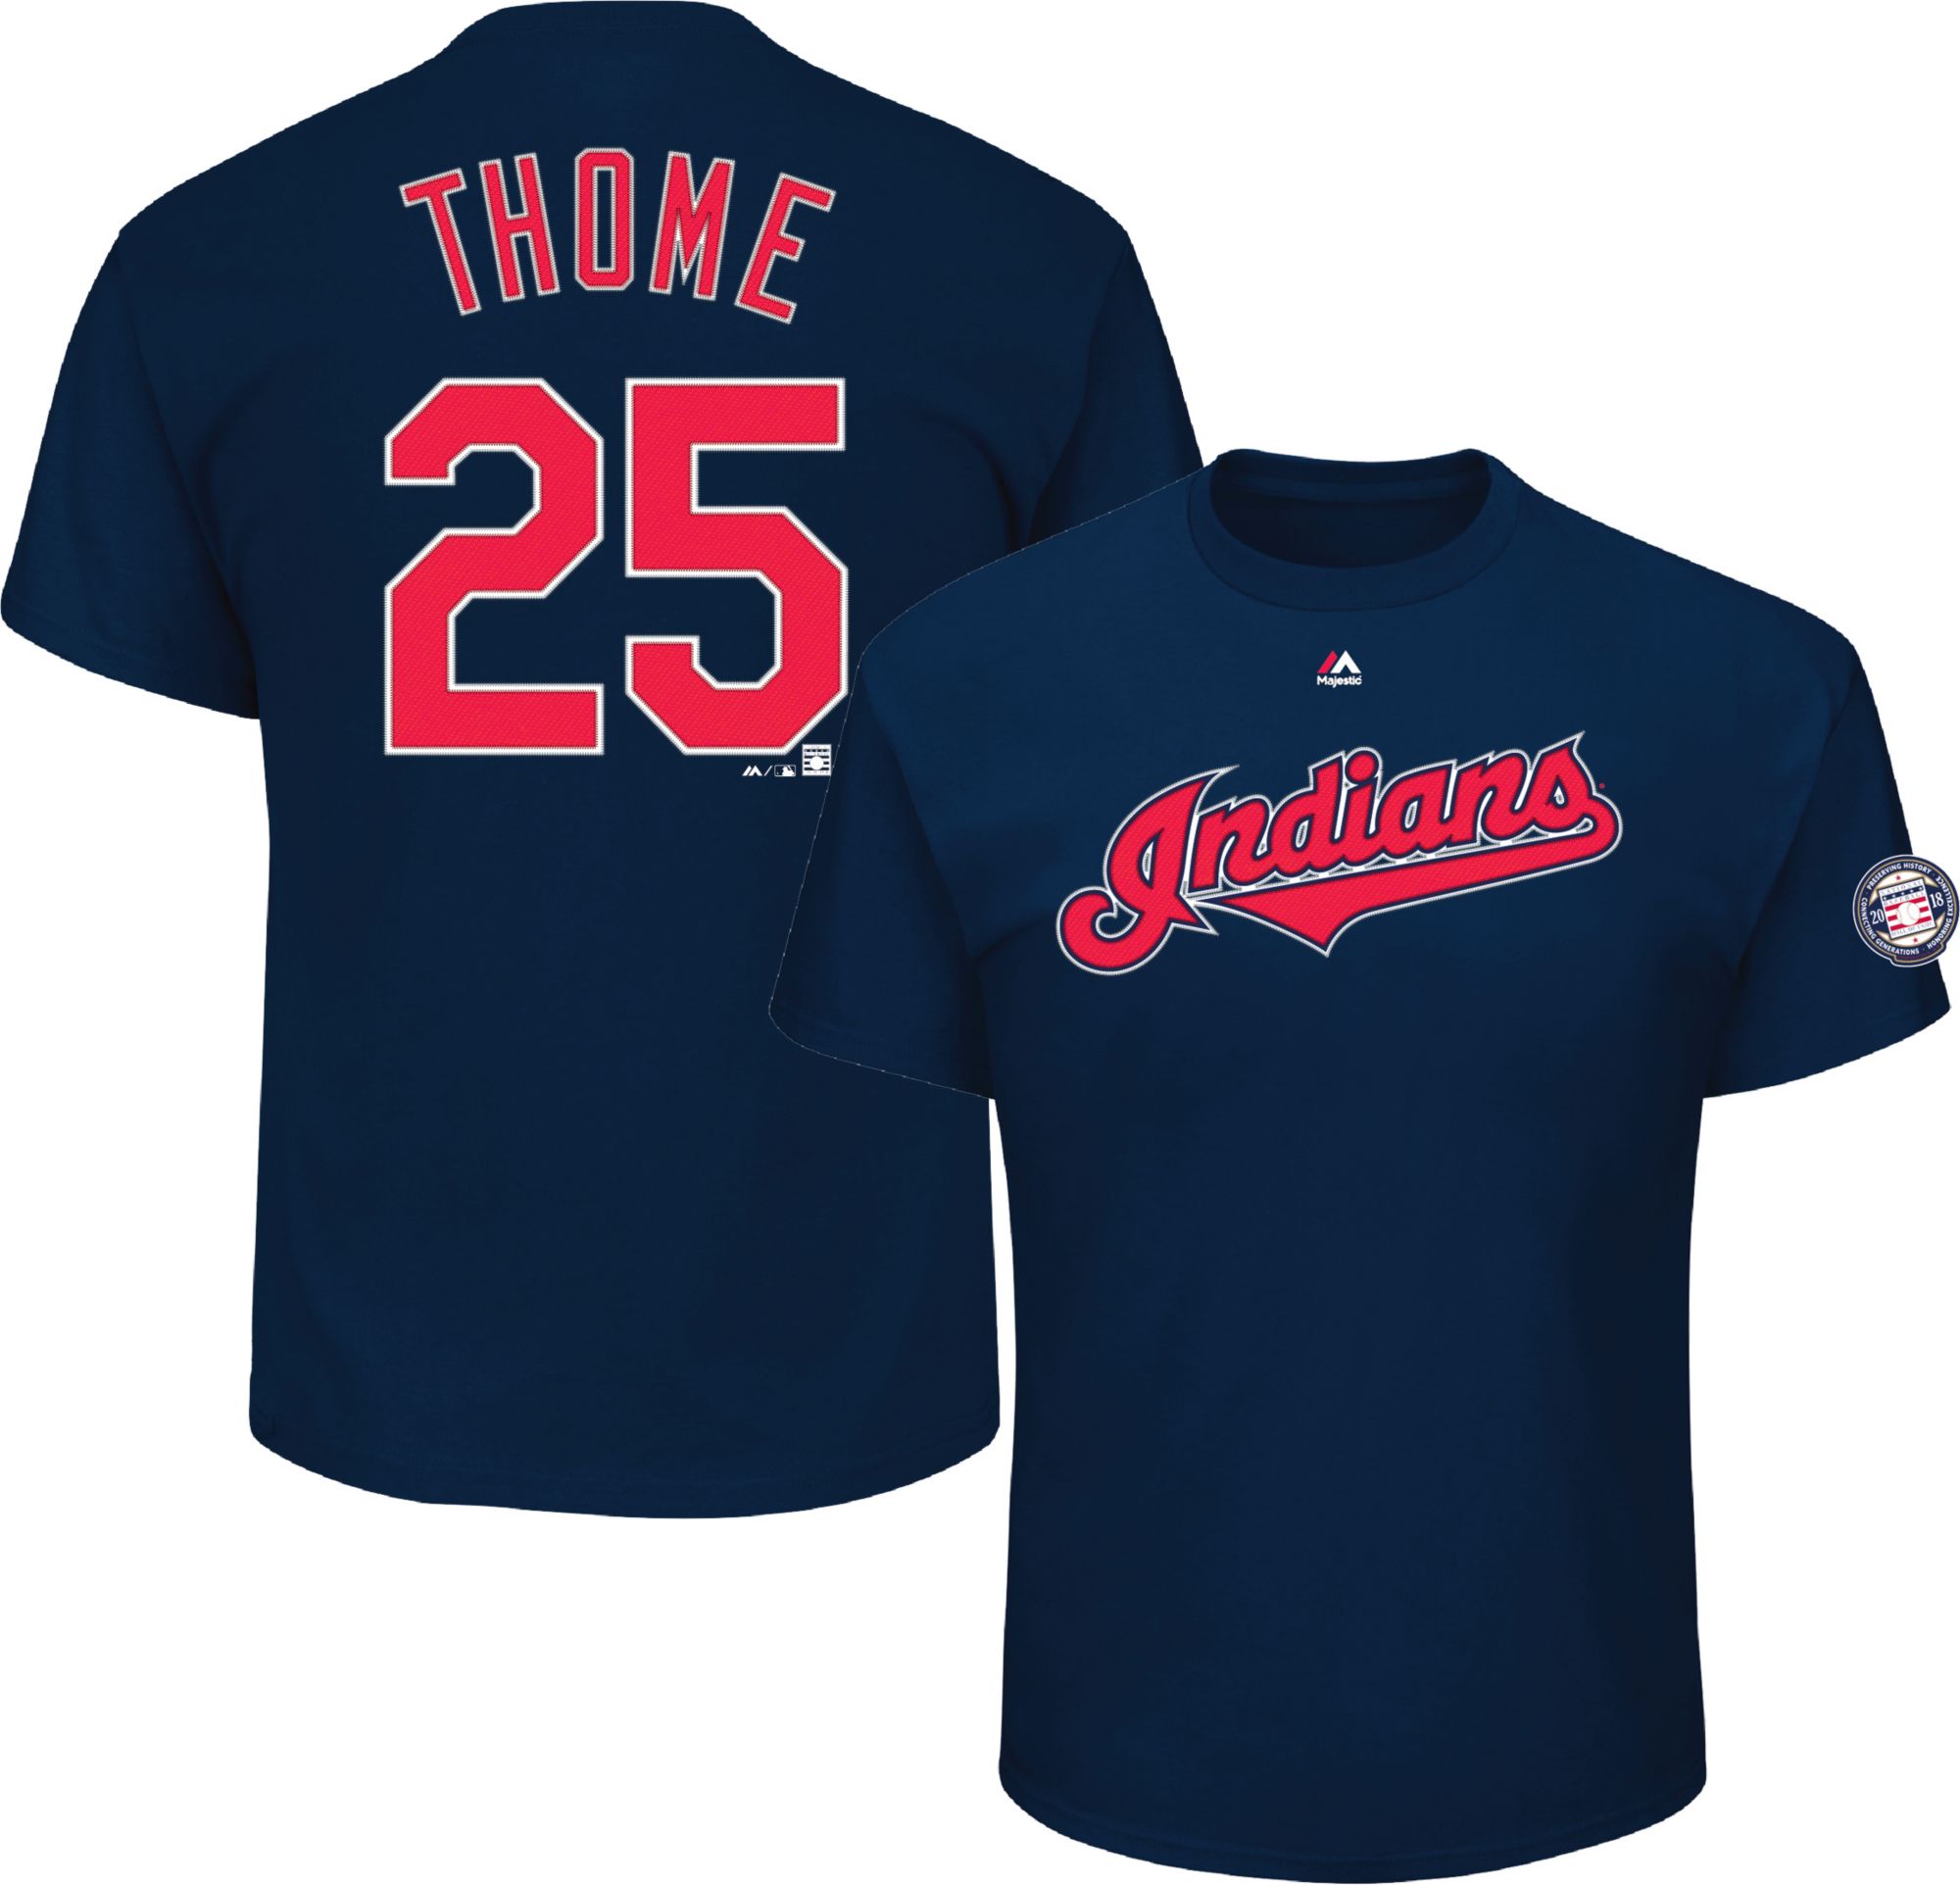 jim thome hall of fame jersey